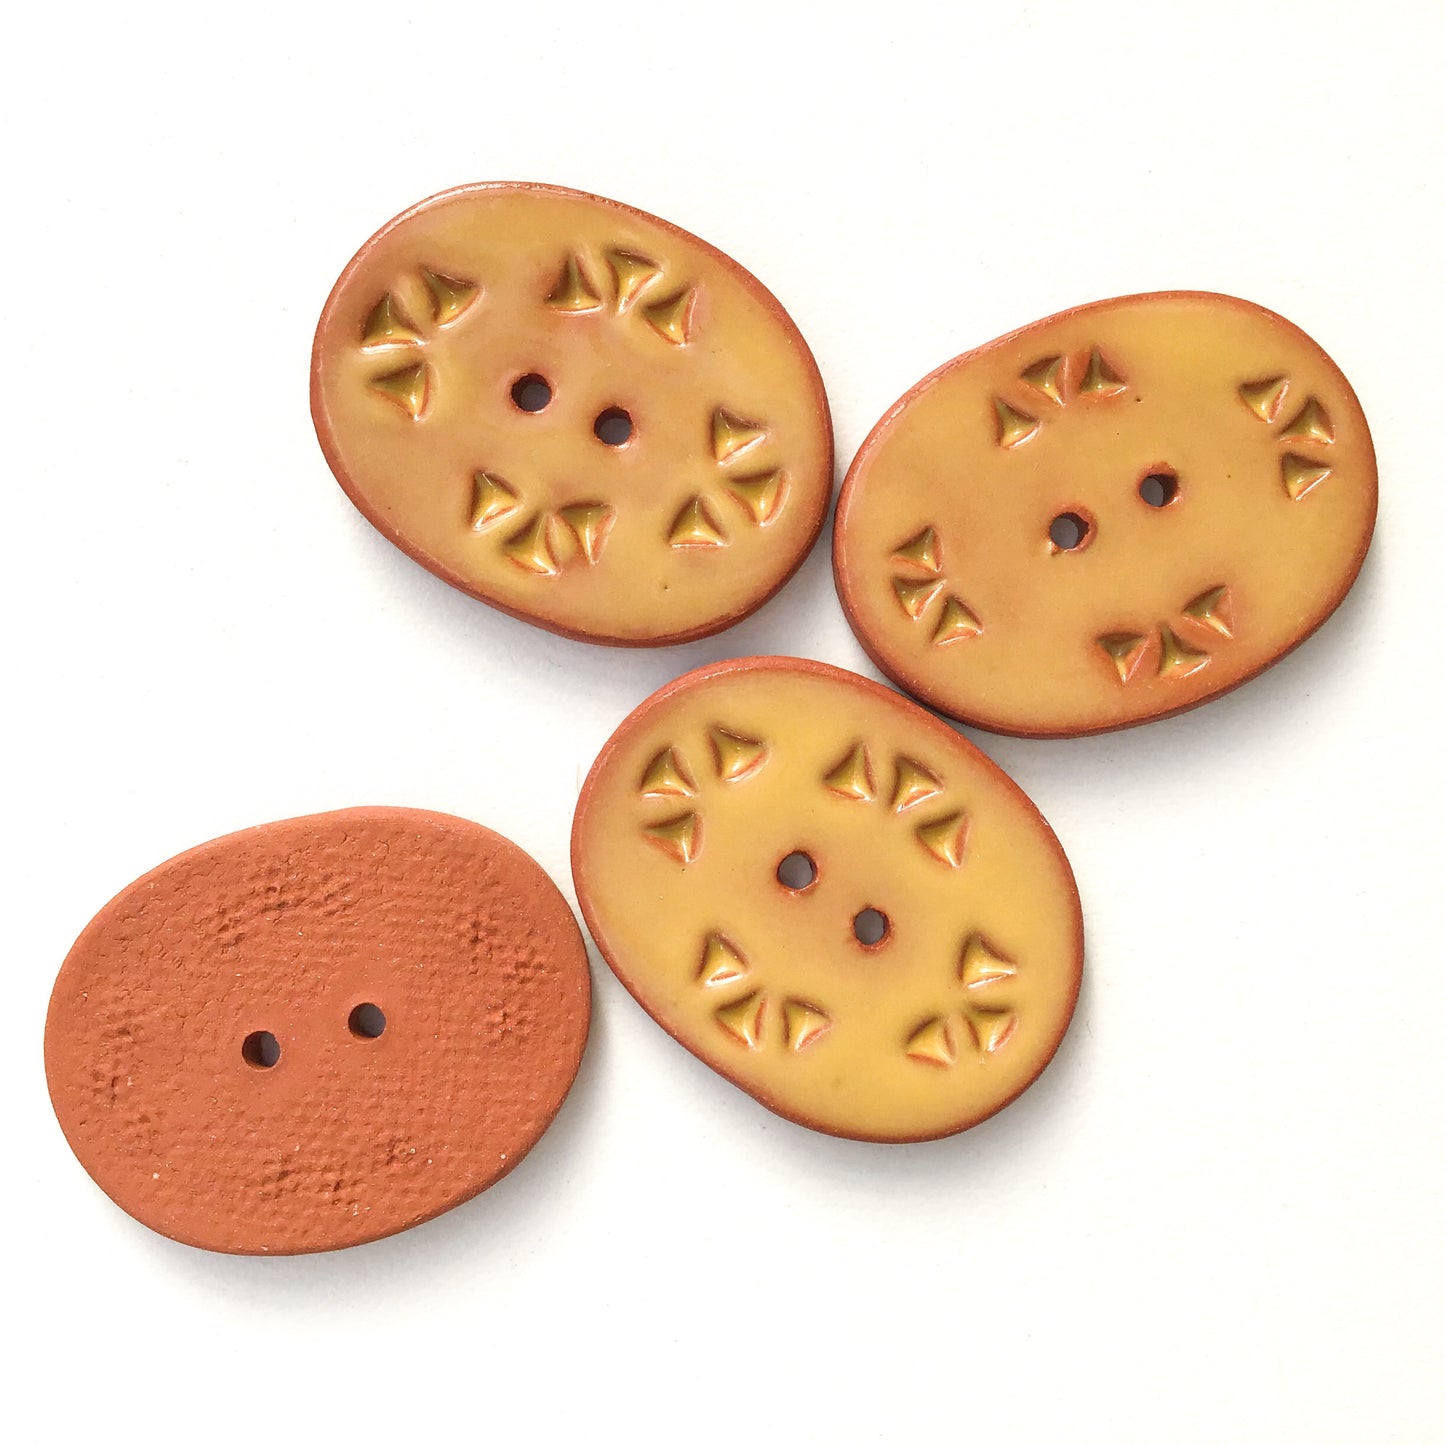 Golden Brown Ceramic Buttons - Oval Clay Buttons on Red Clay - 1" x 1 1/4" (ws-87)